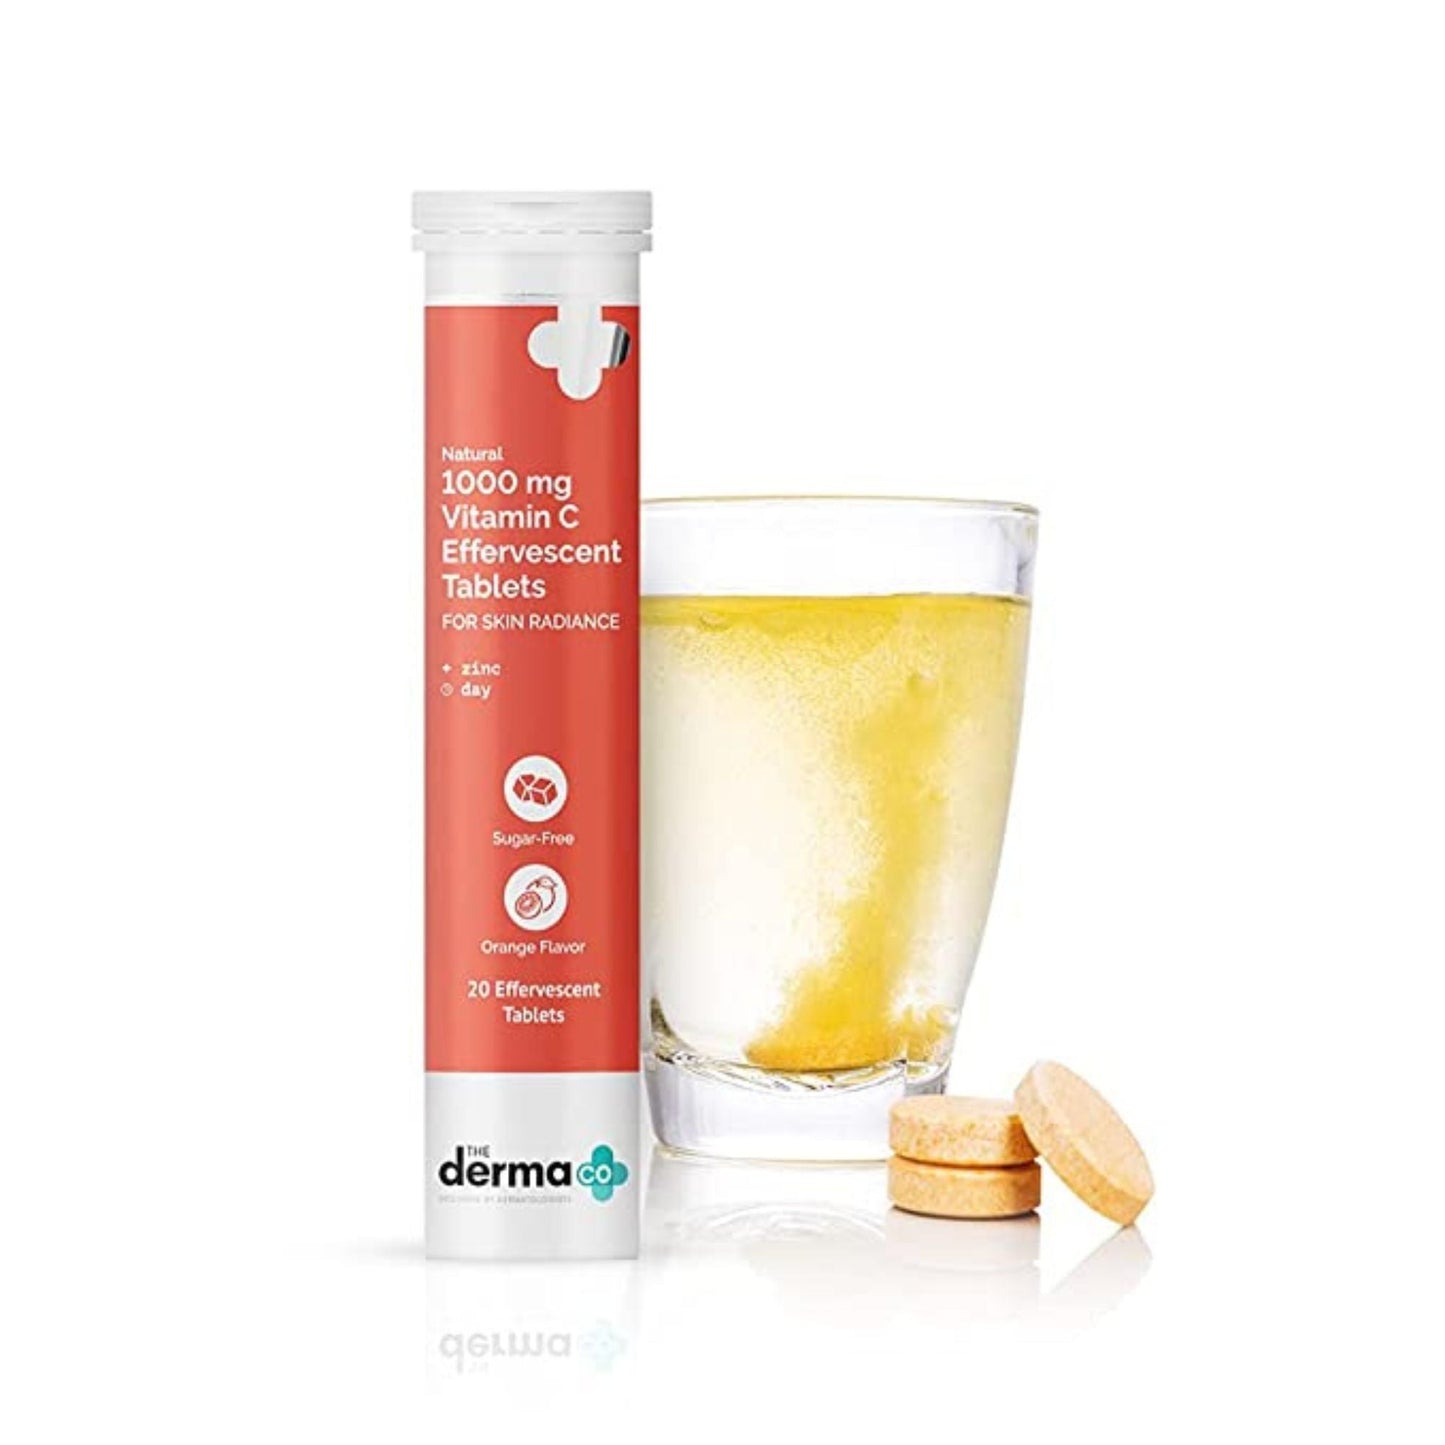 The Derma Co 1000 mg Vitamin C Tablets Effervescent Supplement(dermaco)